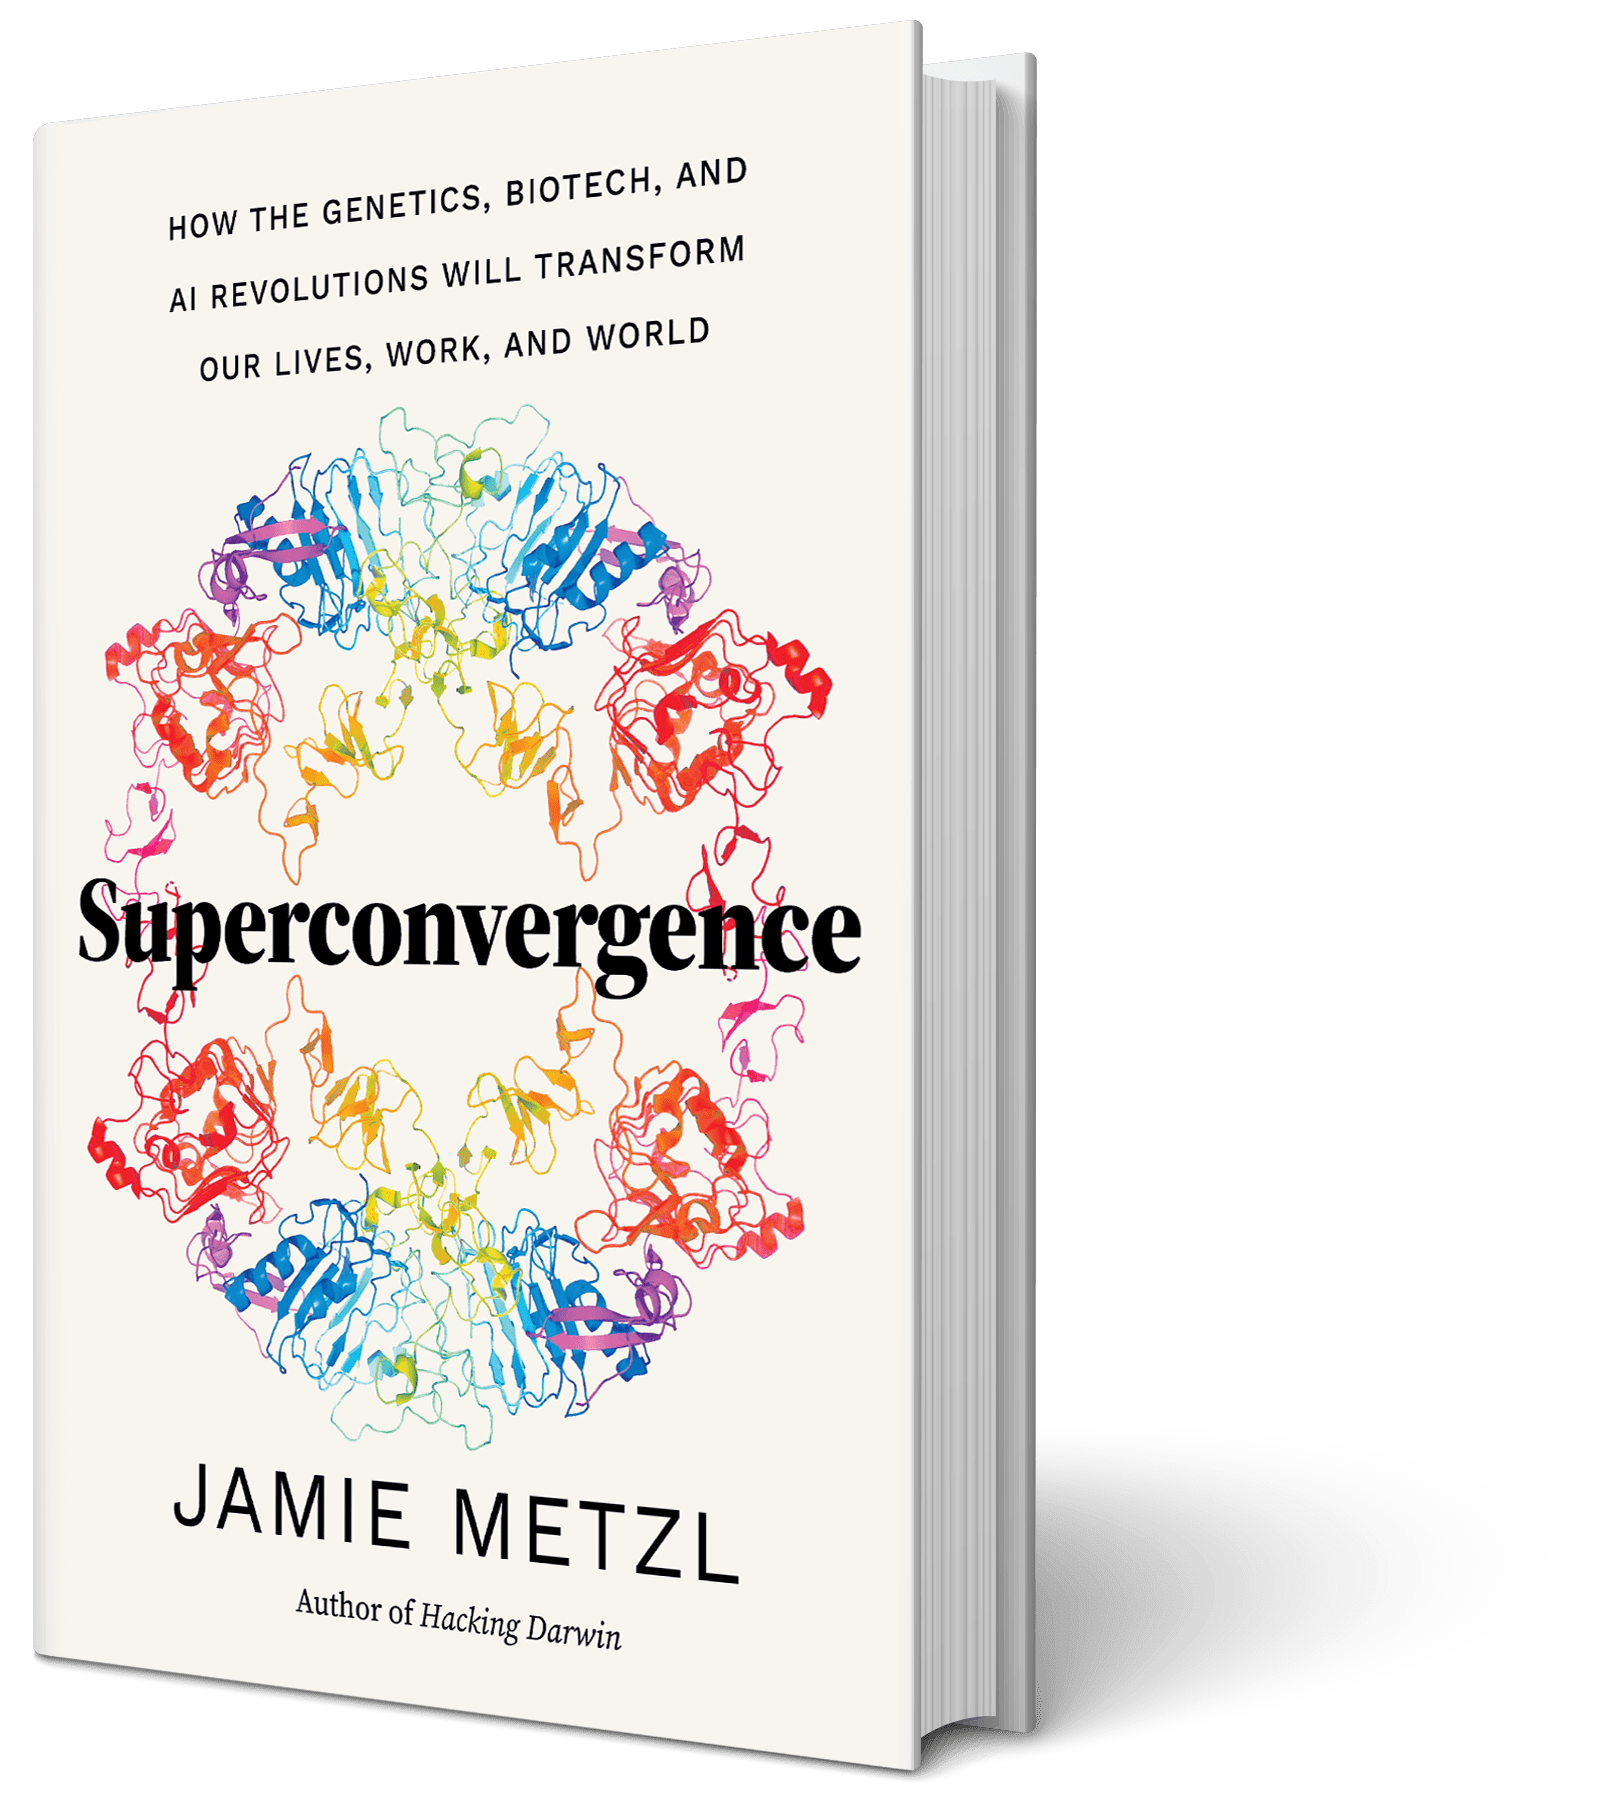 Superconvergence, a new book by Jamie Metzl